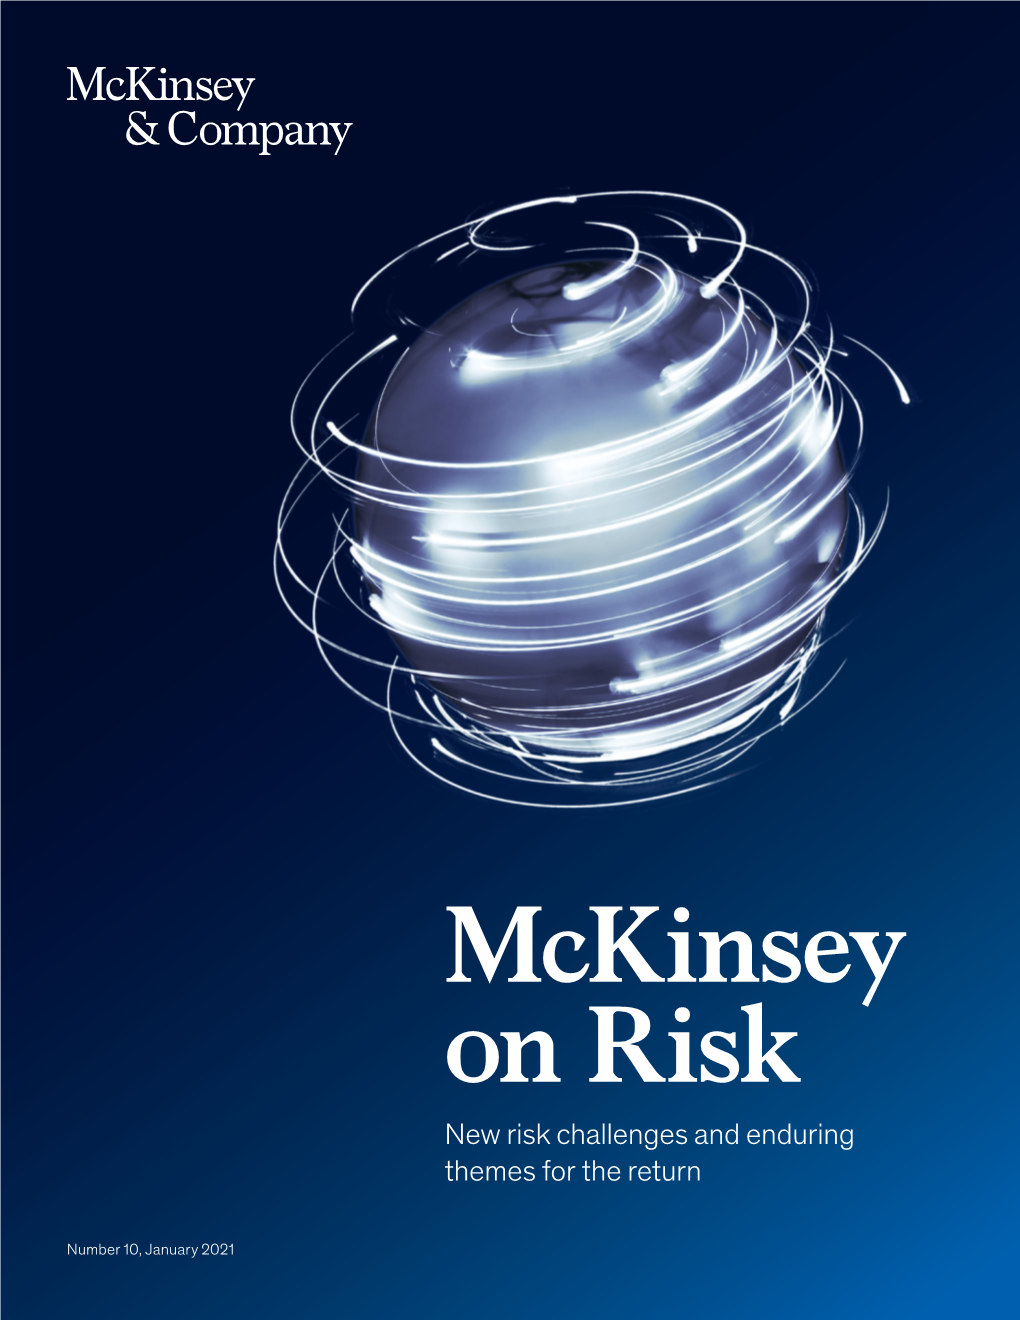 New Risk Challenges and Enduring Themes for the Return